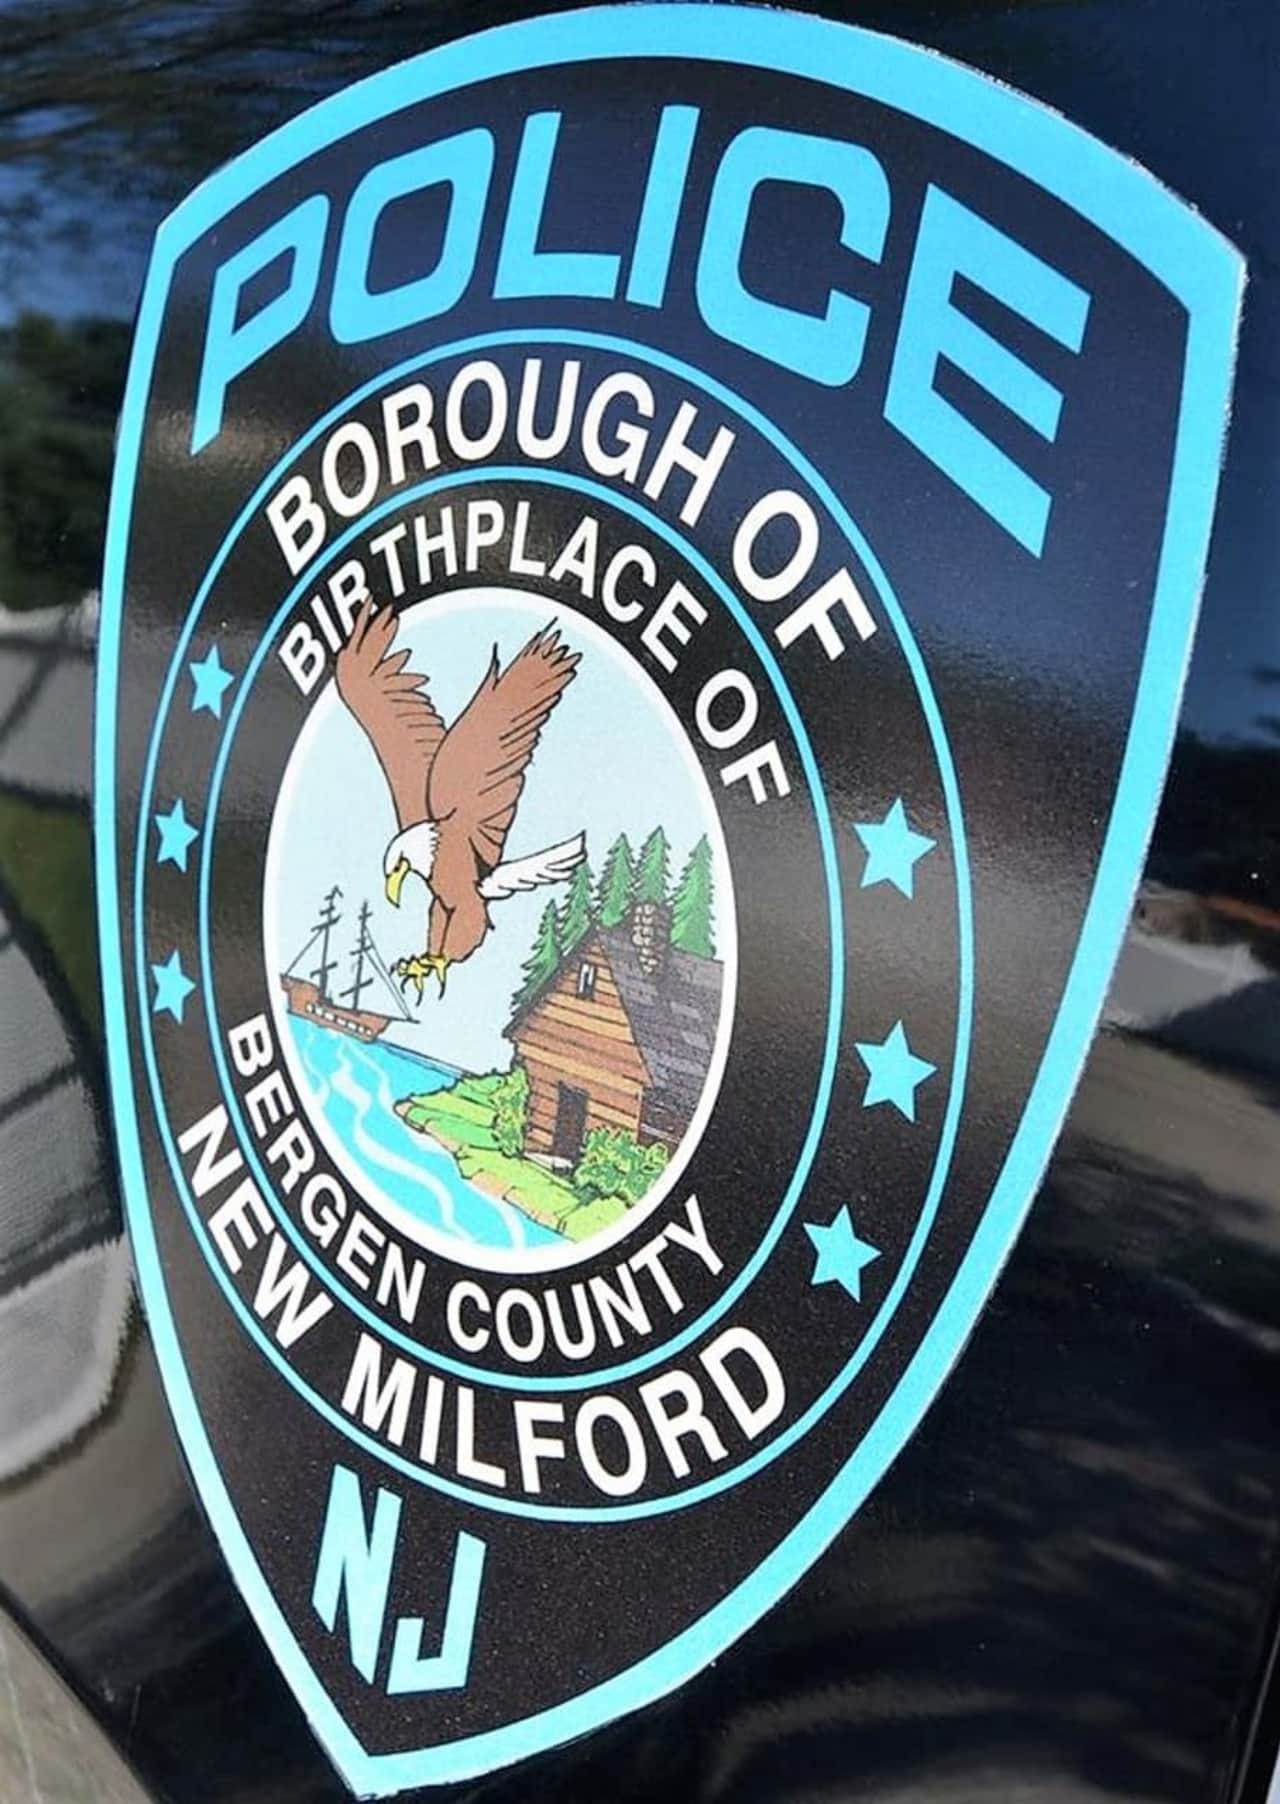 New Milford police.